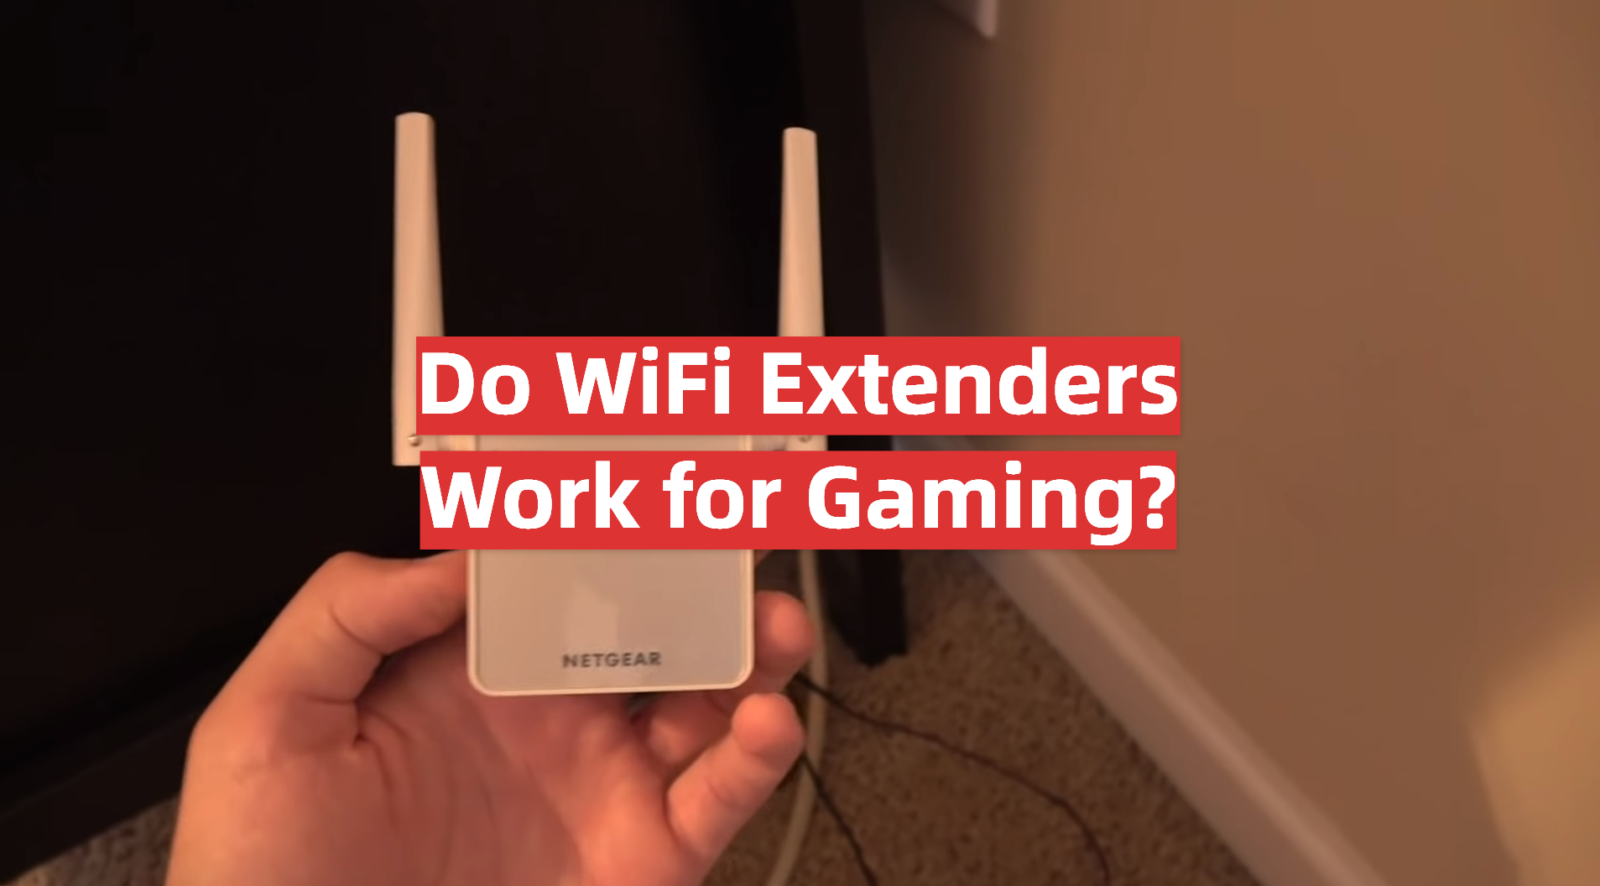 Do WiFi Extenders Work for Gaming?